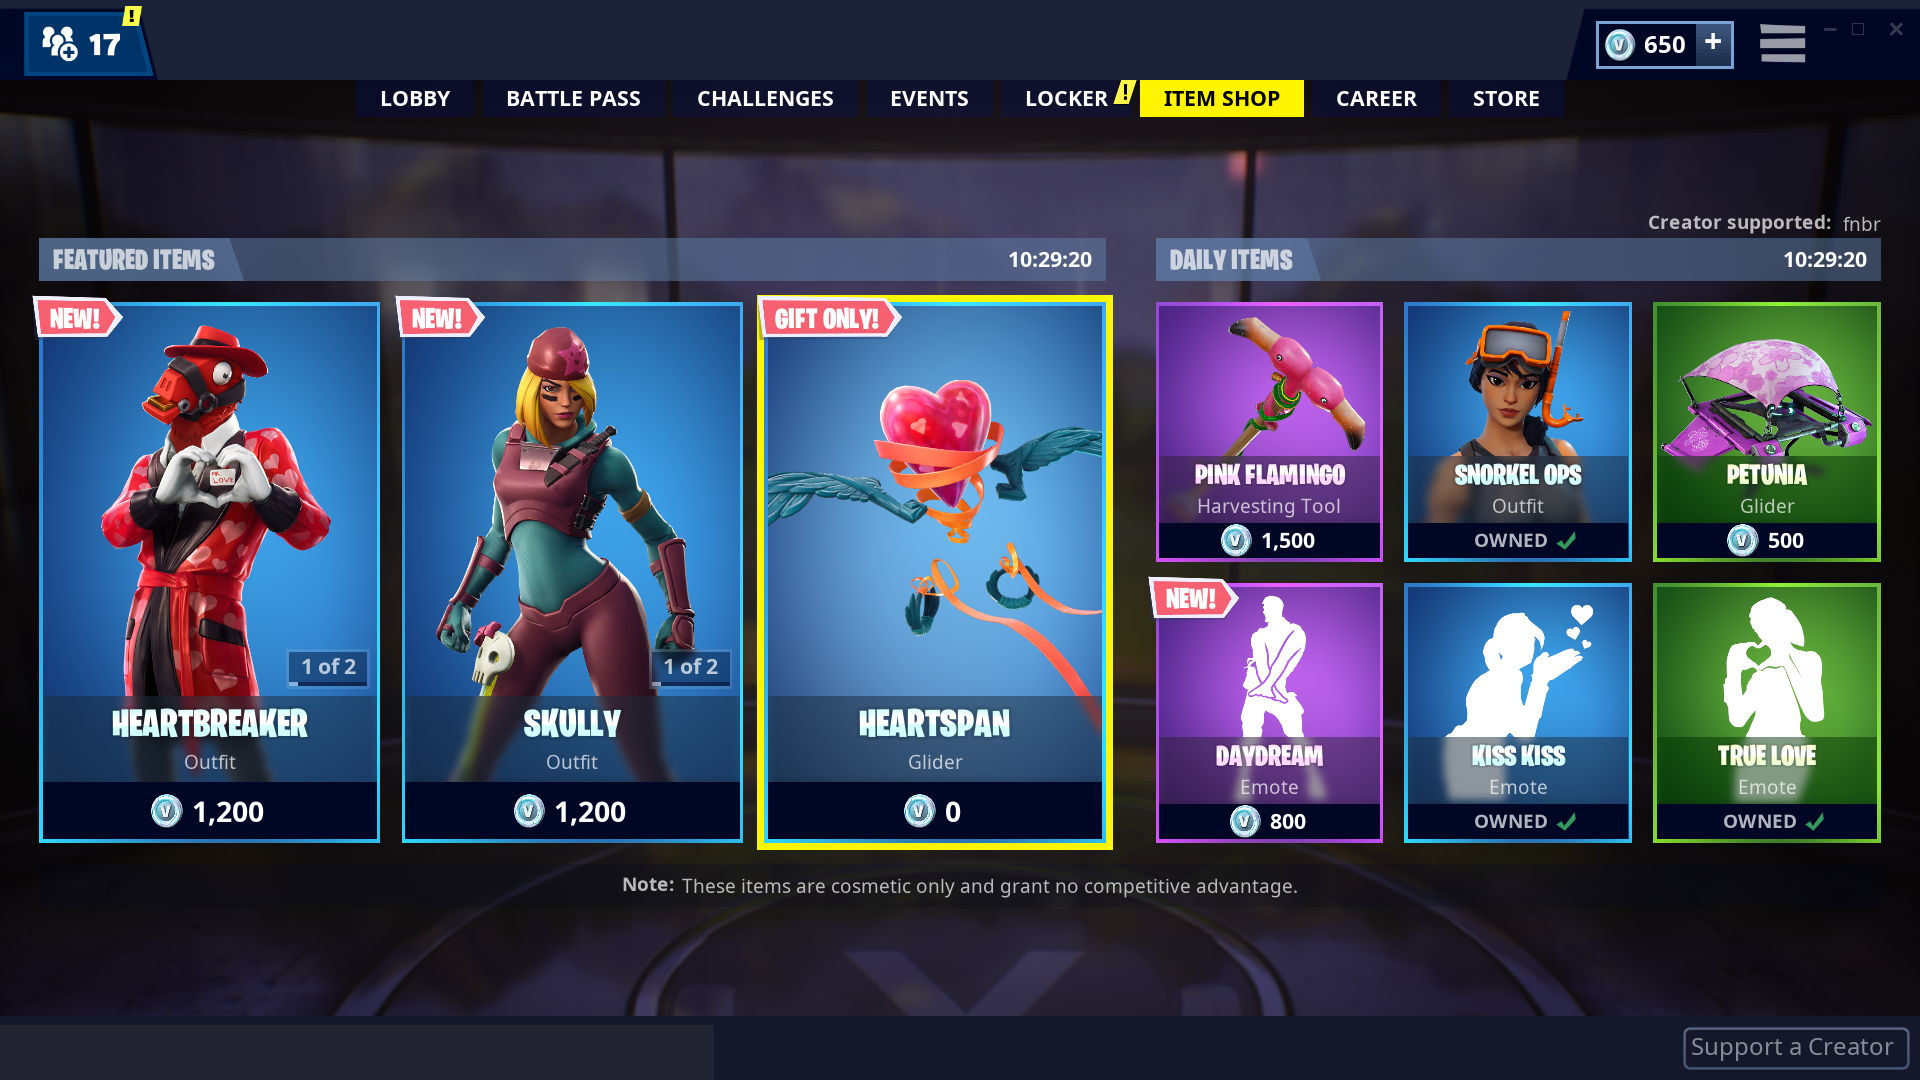 head to the item shop tab and select the heartspan panel - fortnite be free